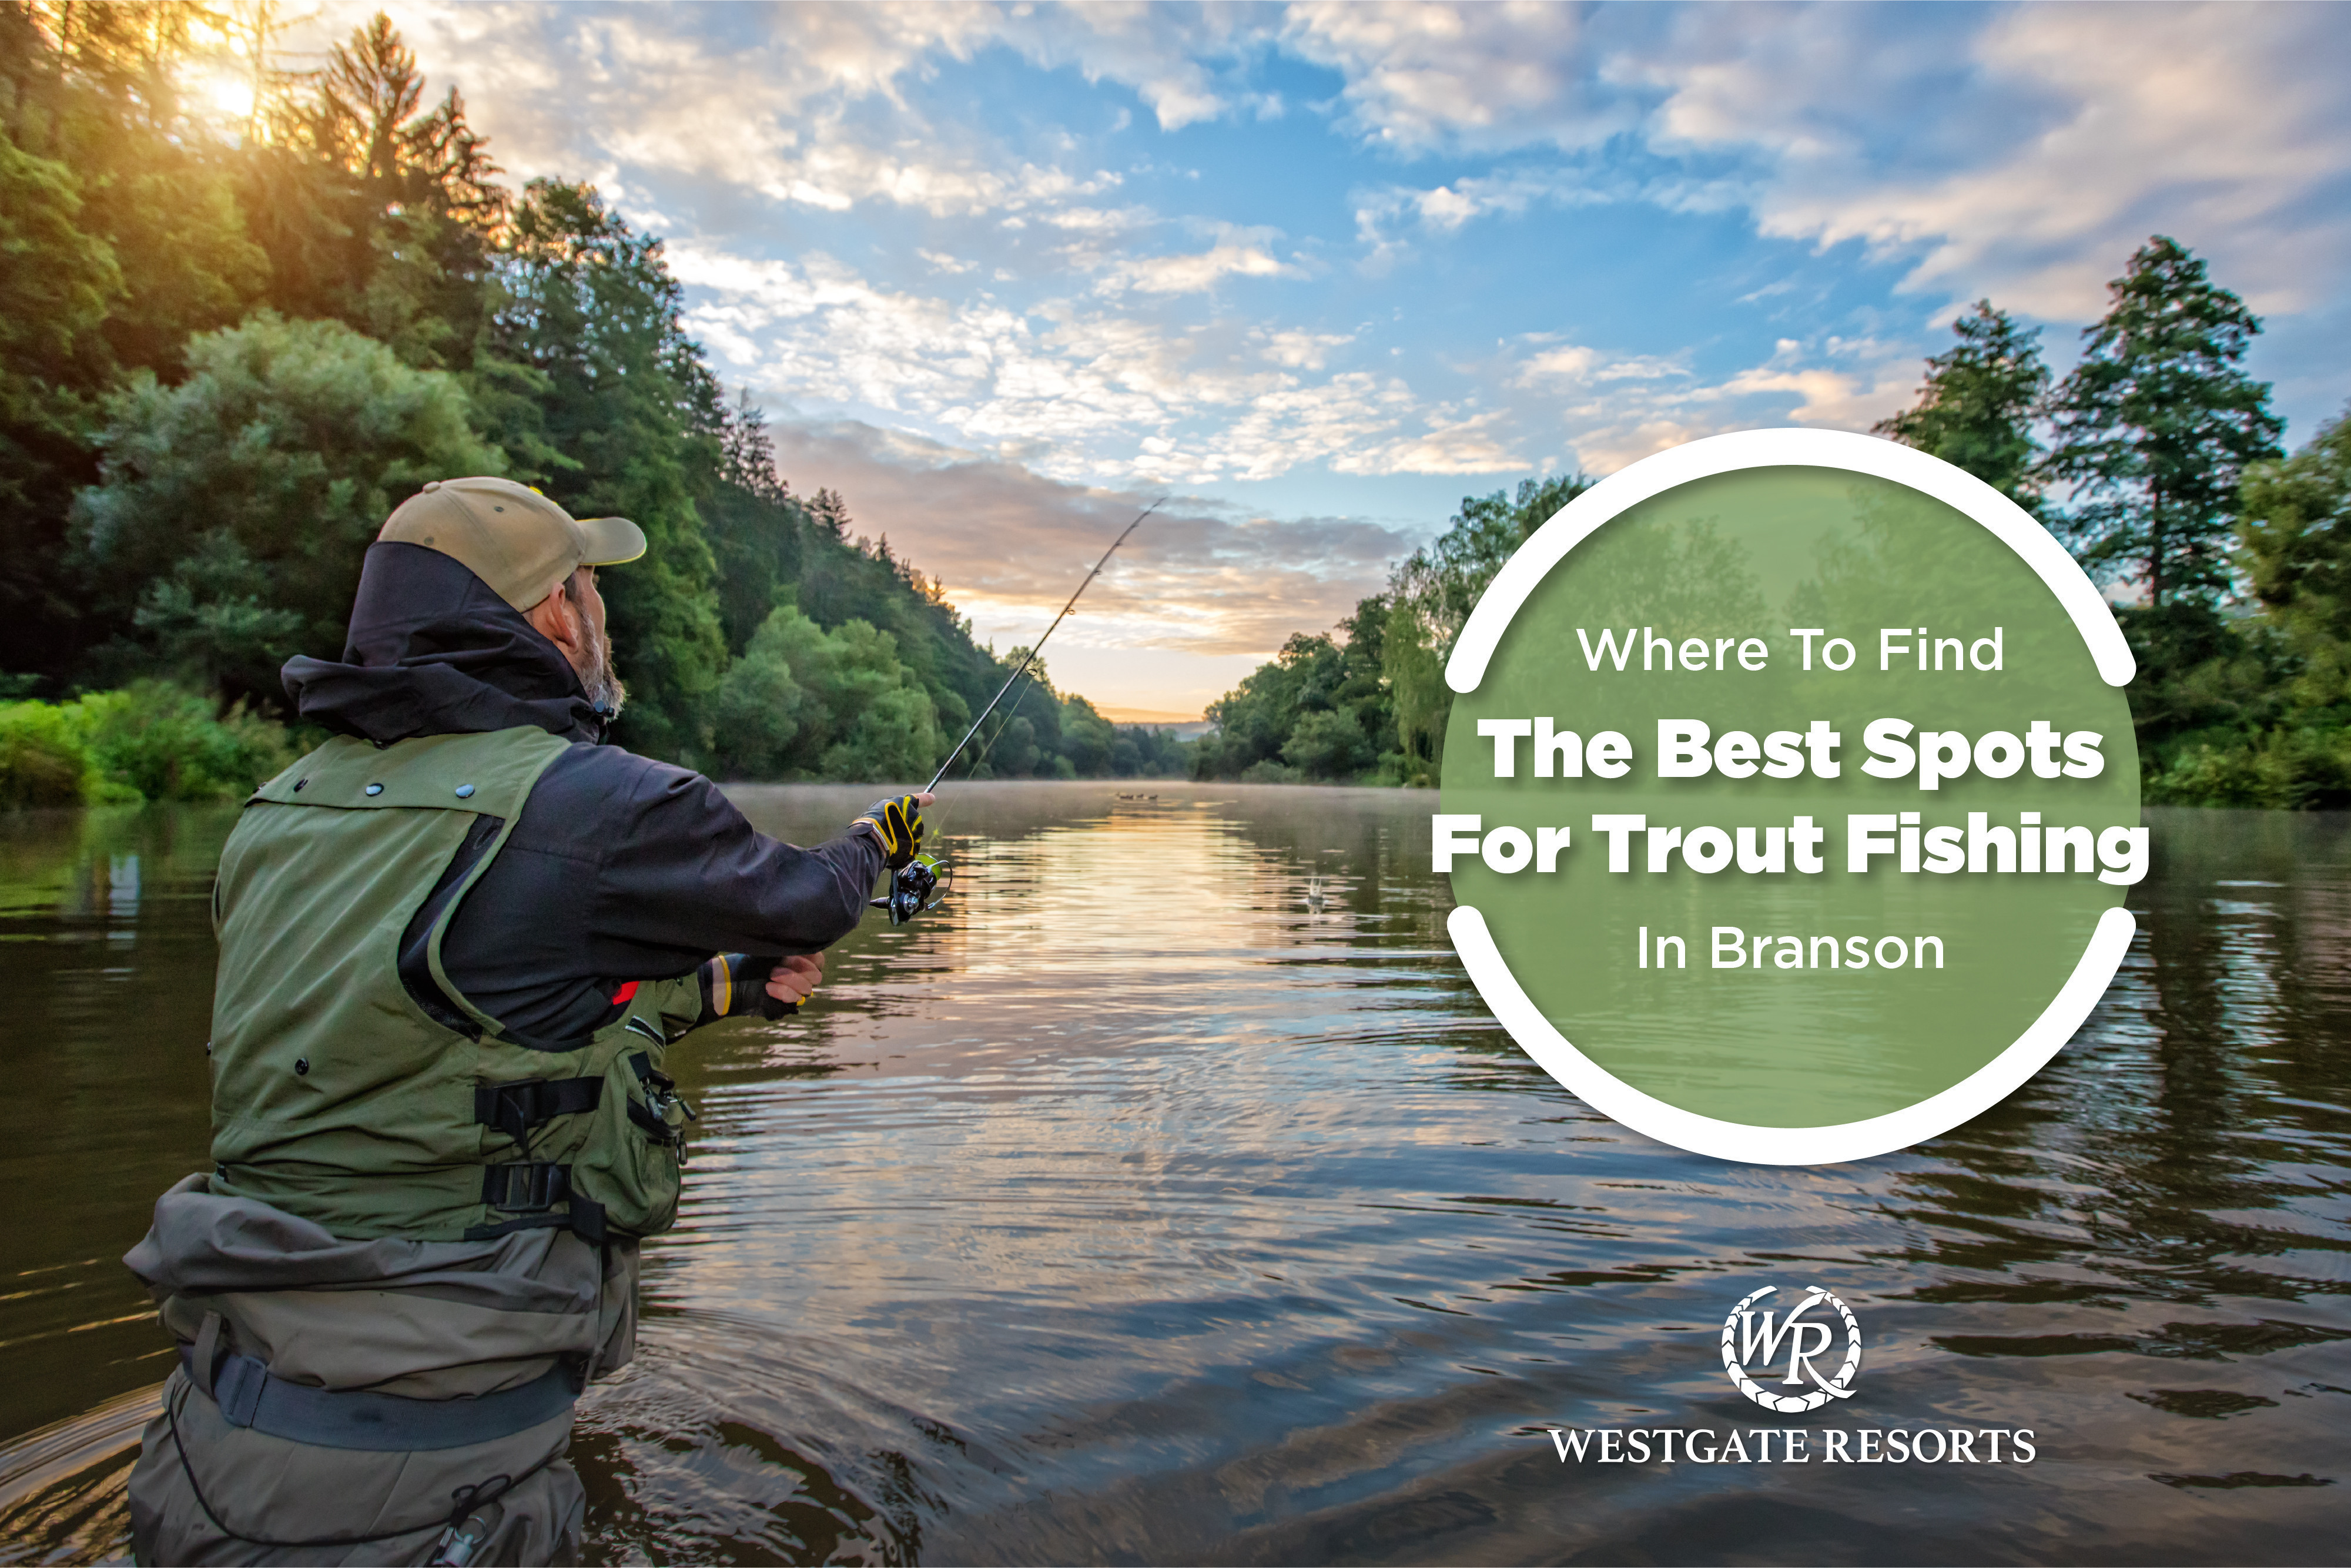 Where to find the best spots for trout fishing in Branson